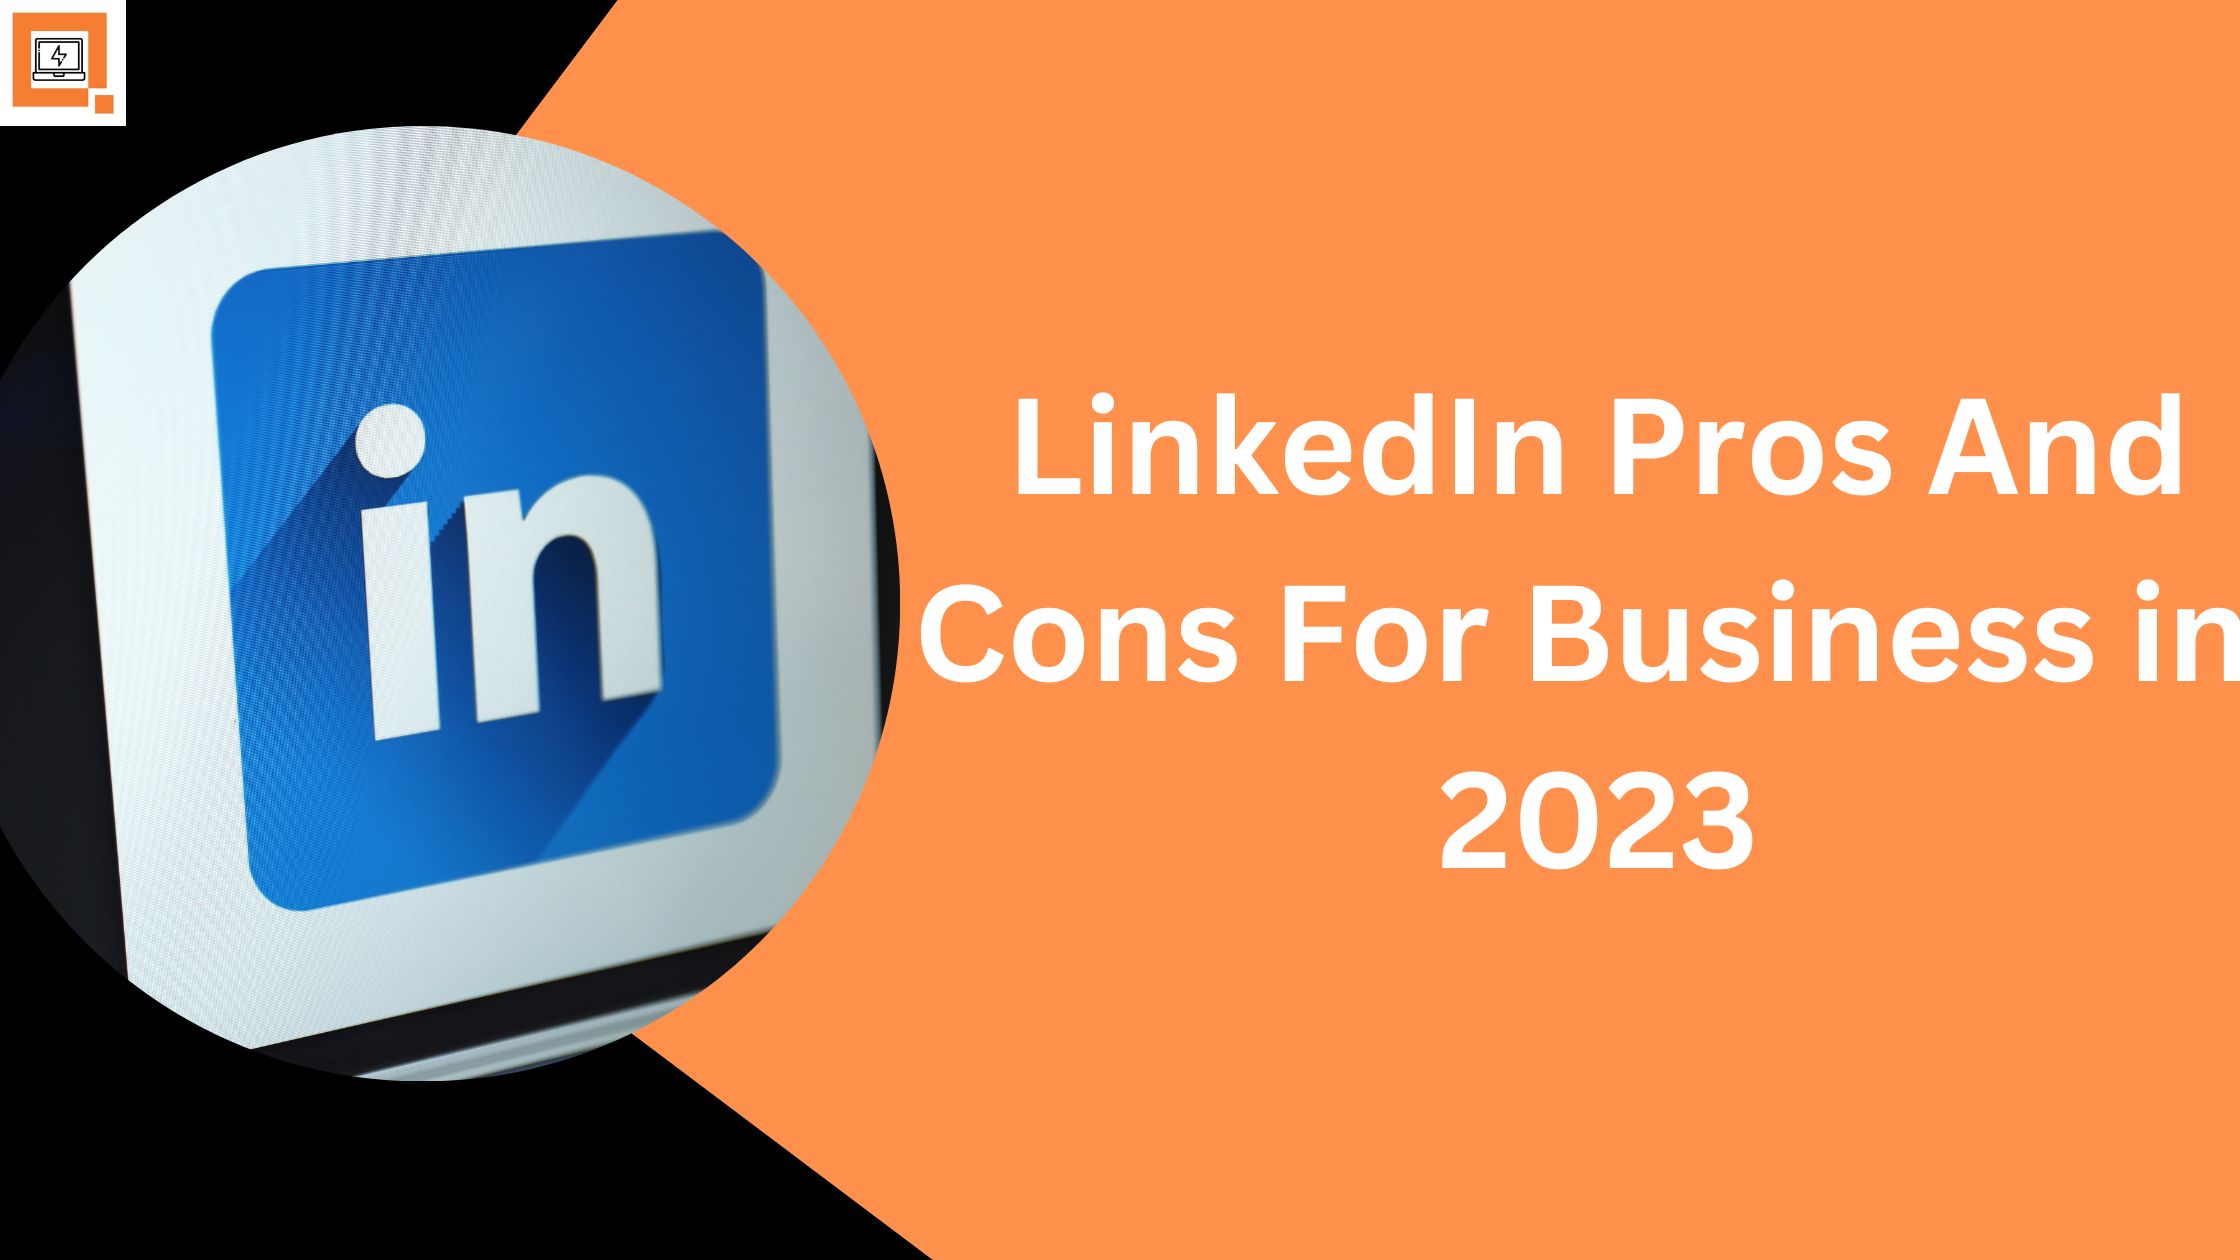 You are currently viewing LinkedIn Pros And Cons For Business in 2023